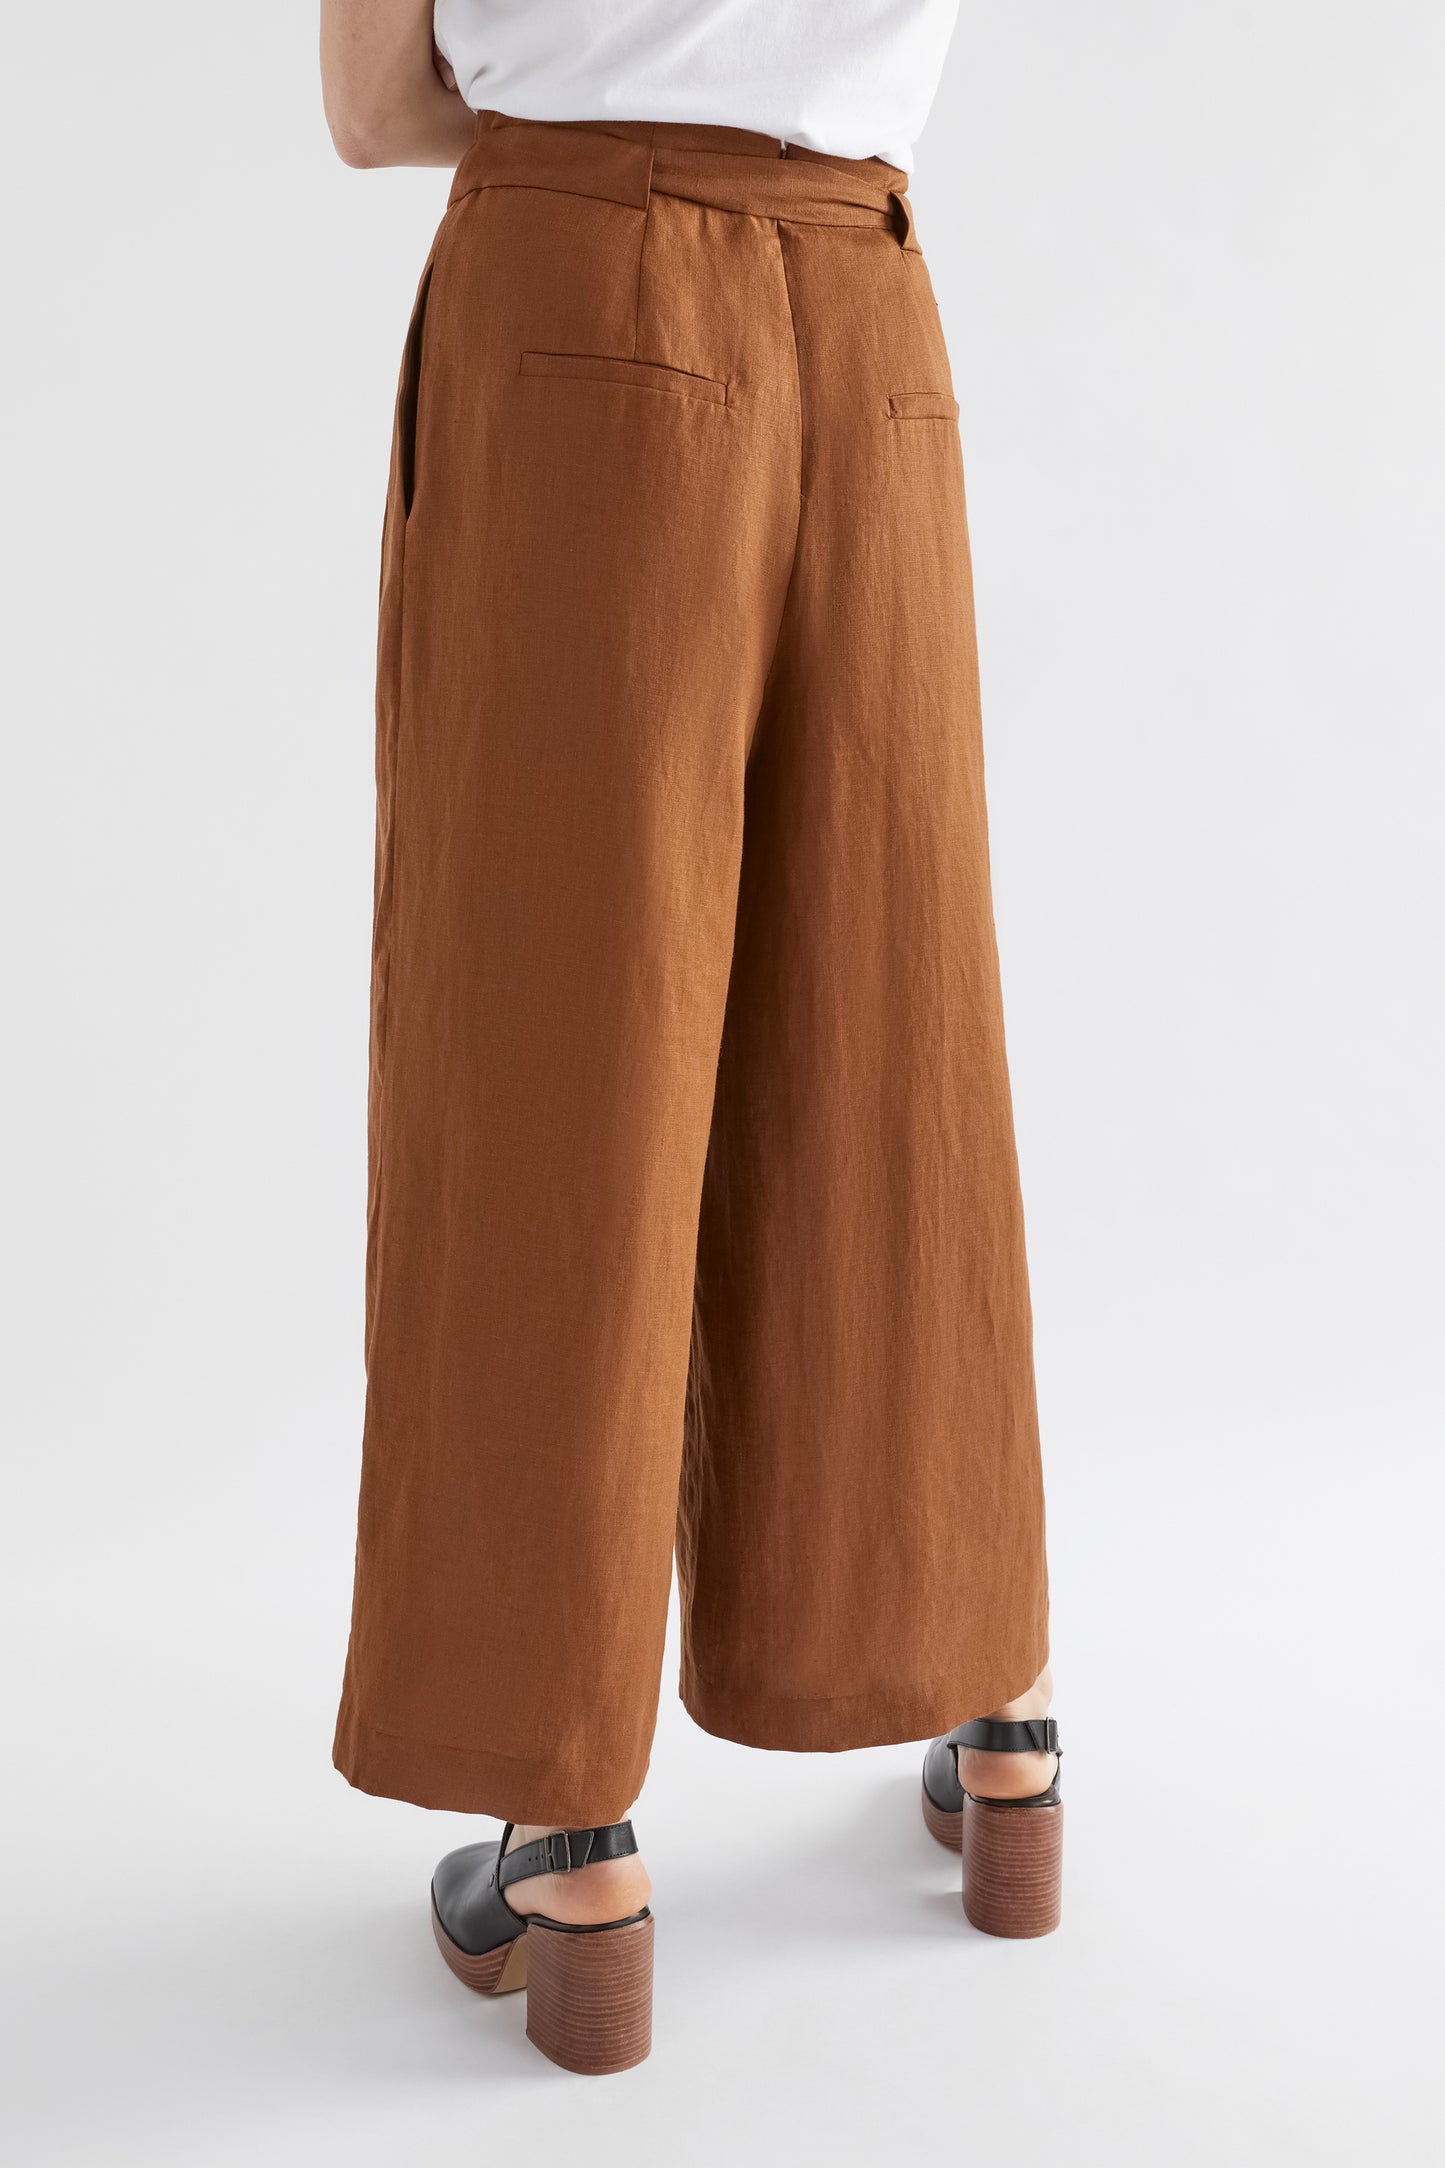 Colino French Linen High Waist Paper Bag Relaxed Pant Model back Crop | BRONZE BROWN